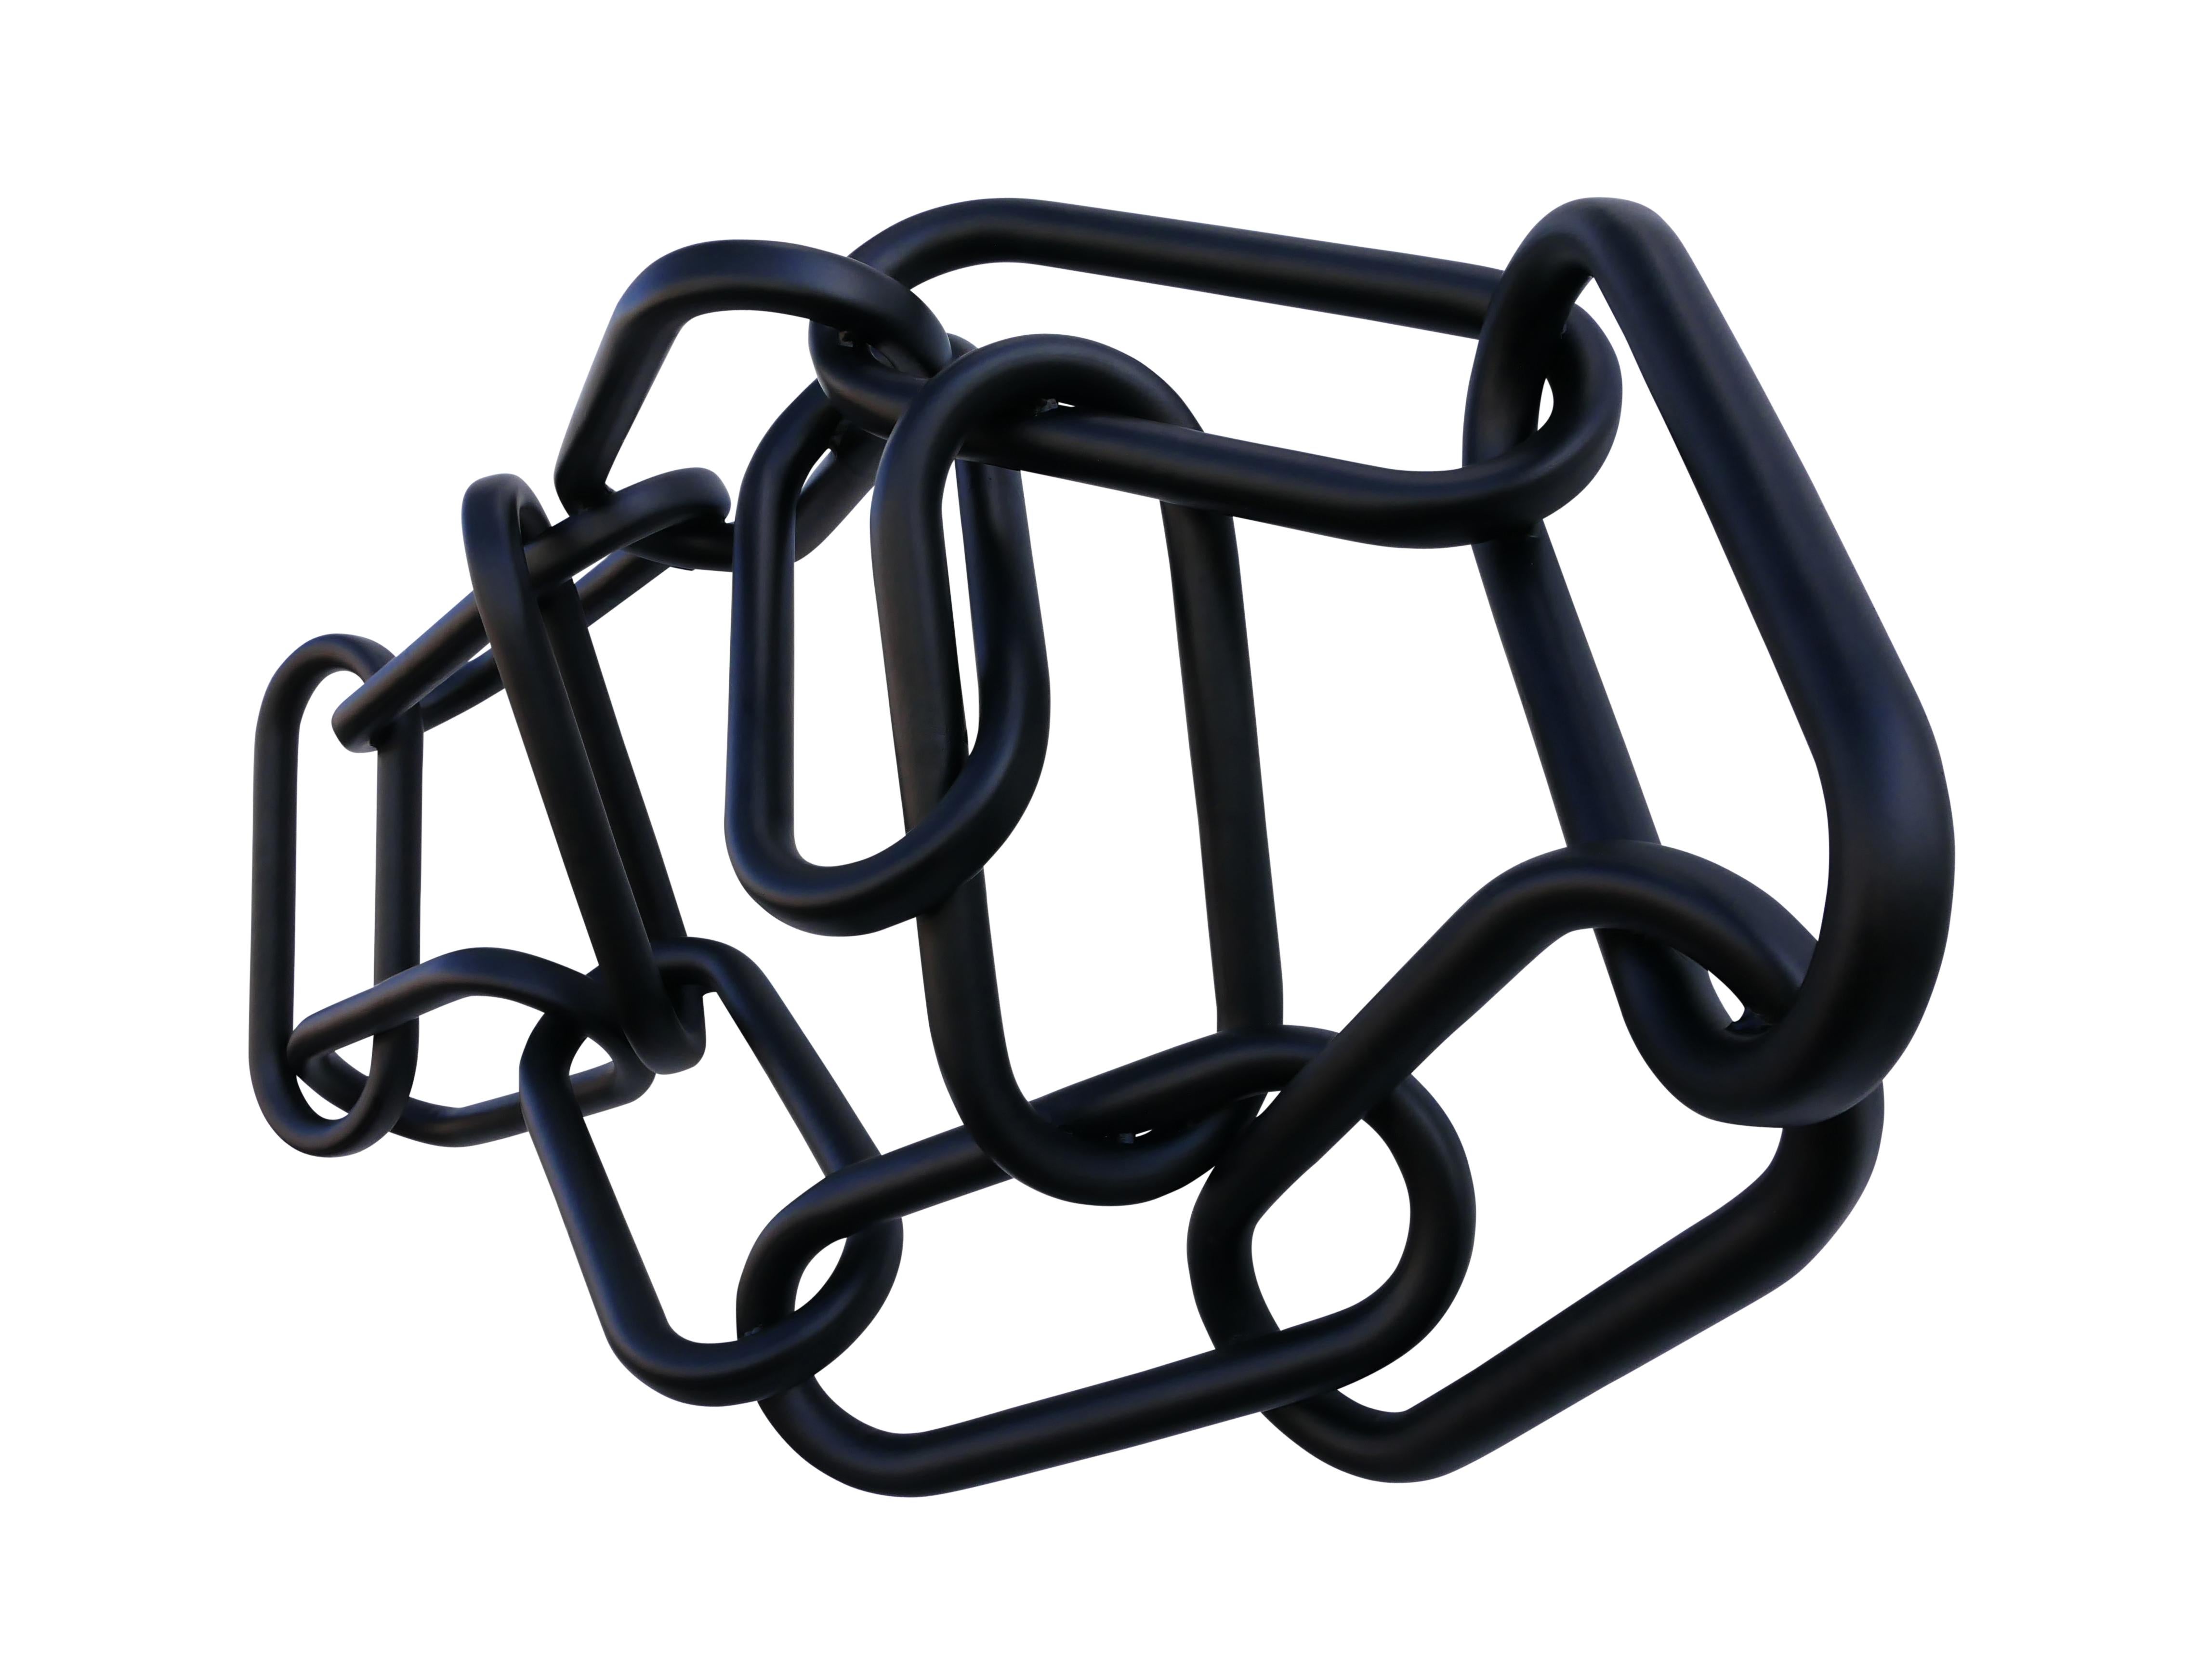 Large abstract contemporary chain sculpture by Houston, TX artist, Matthew Reeves. The sculpture depicts a linked chain sculpture that can be displayed either vertically or horizontally. It is made of powder-coated aluminum and is an excellent